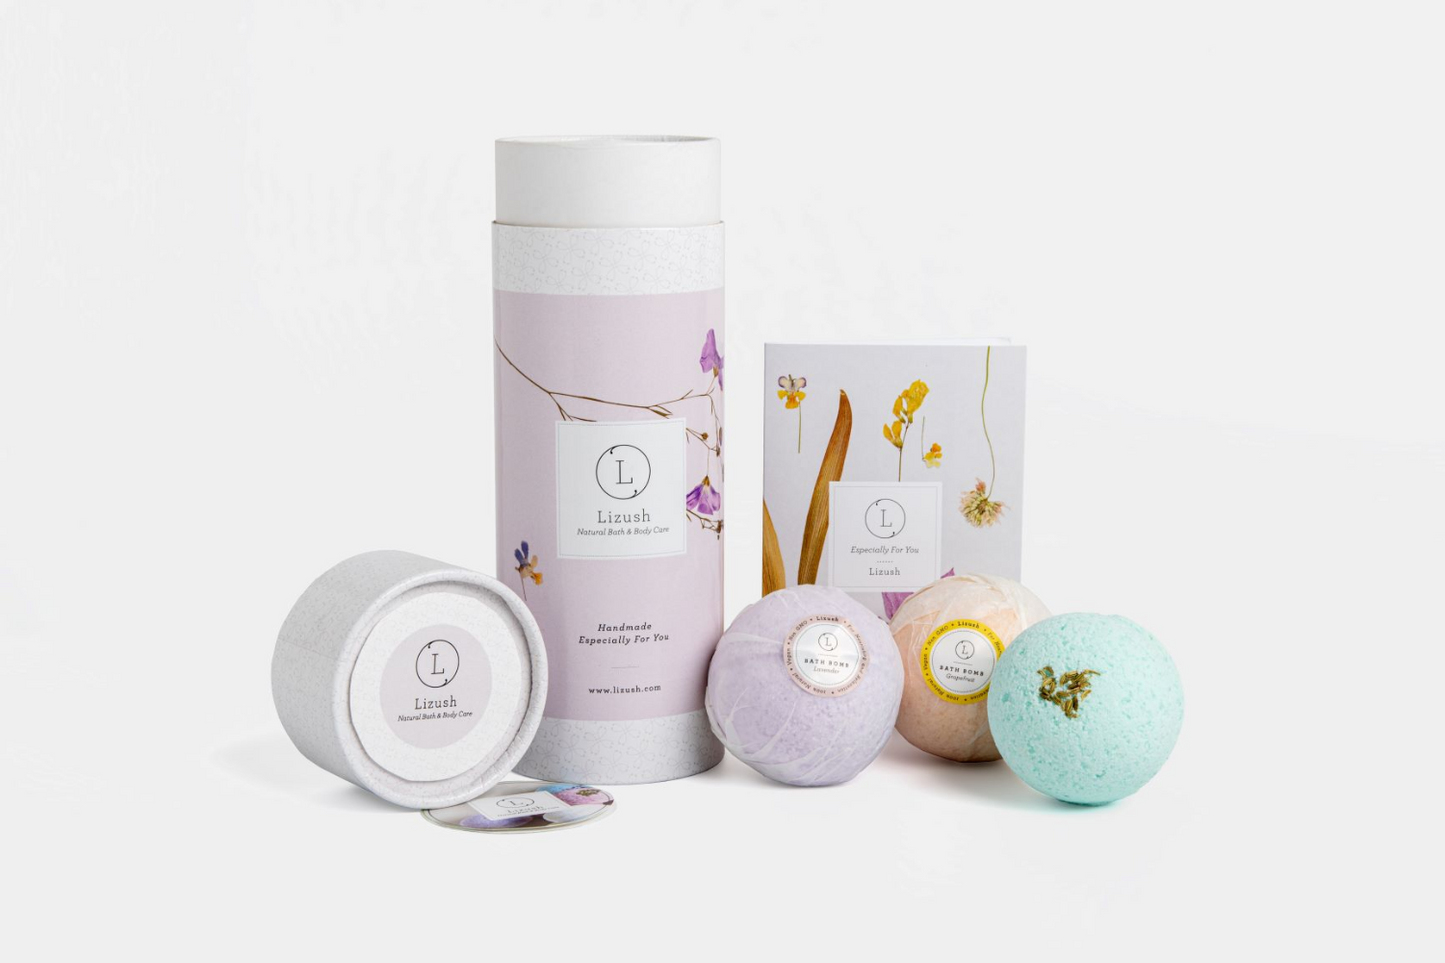 Gift includes: ❀ 3 Bath bombs (4 oz each) - individually wrapped with wax paper and label - (color may vary) ❀ Large Elegant tube box - Make it Special and add name on the lid ❀ Your personal note printed on a beautiful card (add your text for the gift note)